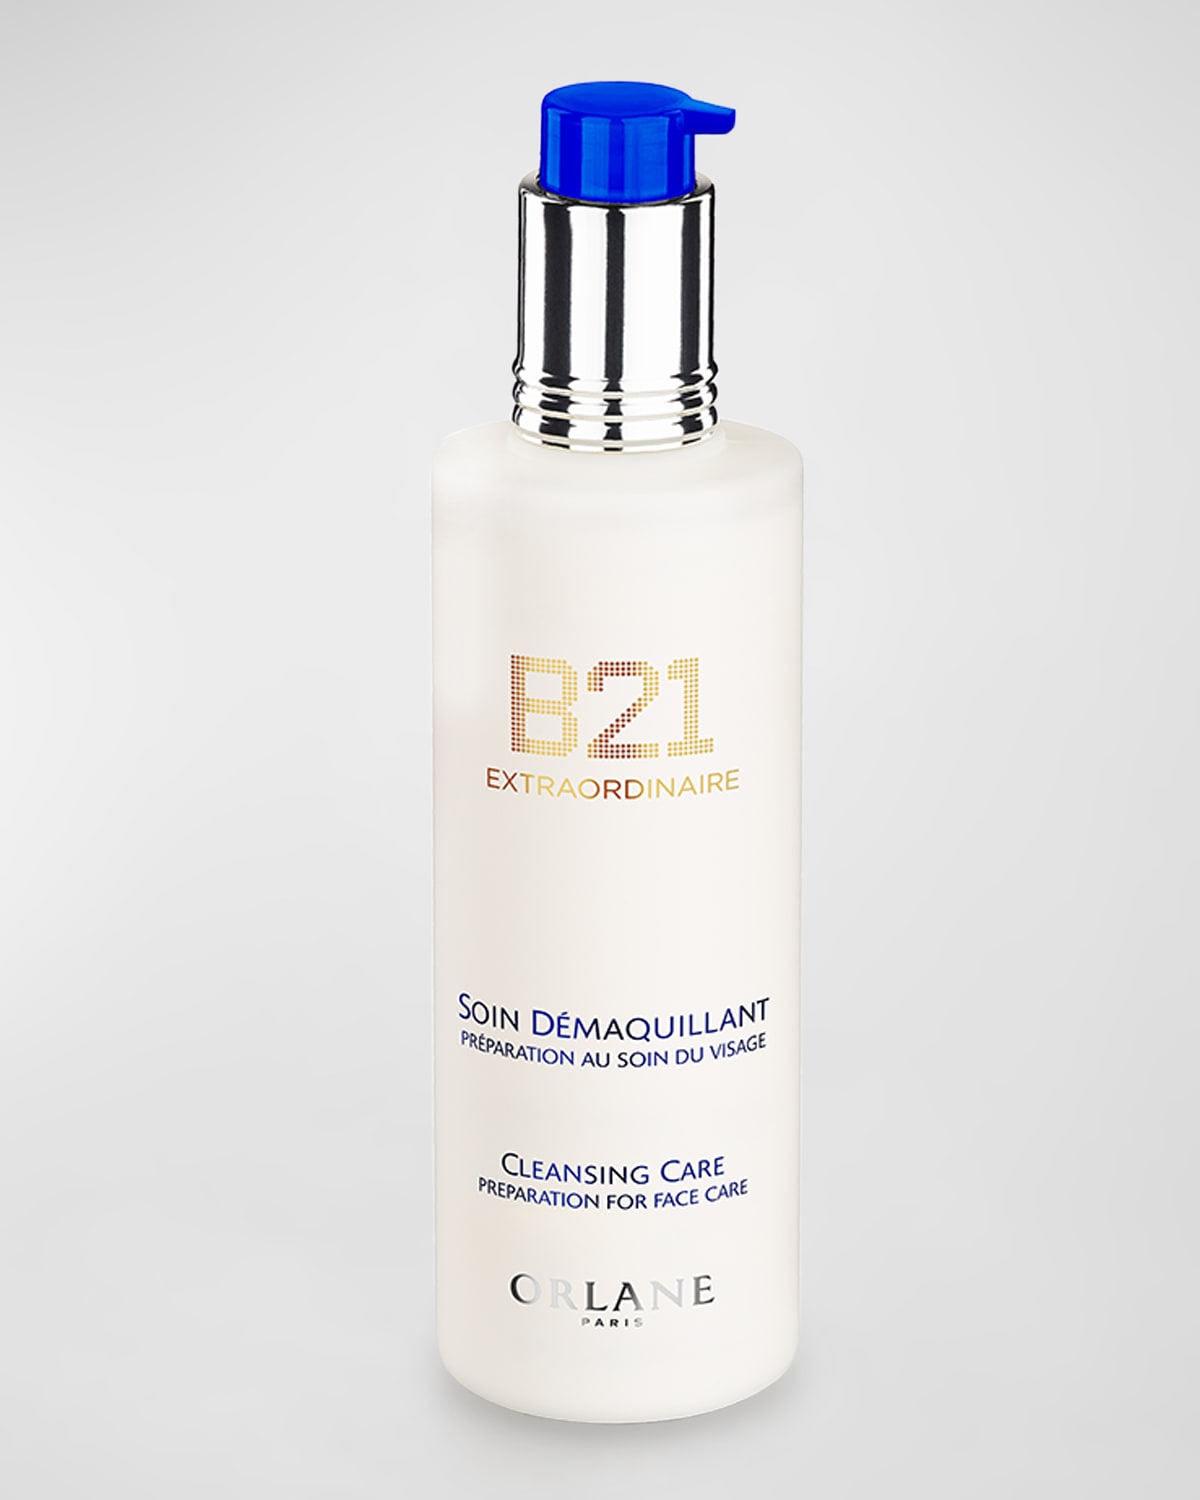 B21 Extraordinaire Cleansing Care, 8.5 oz.